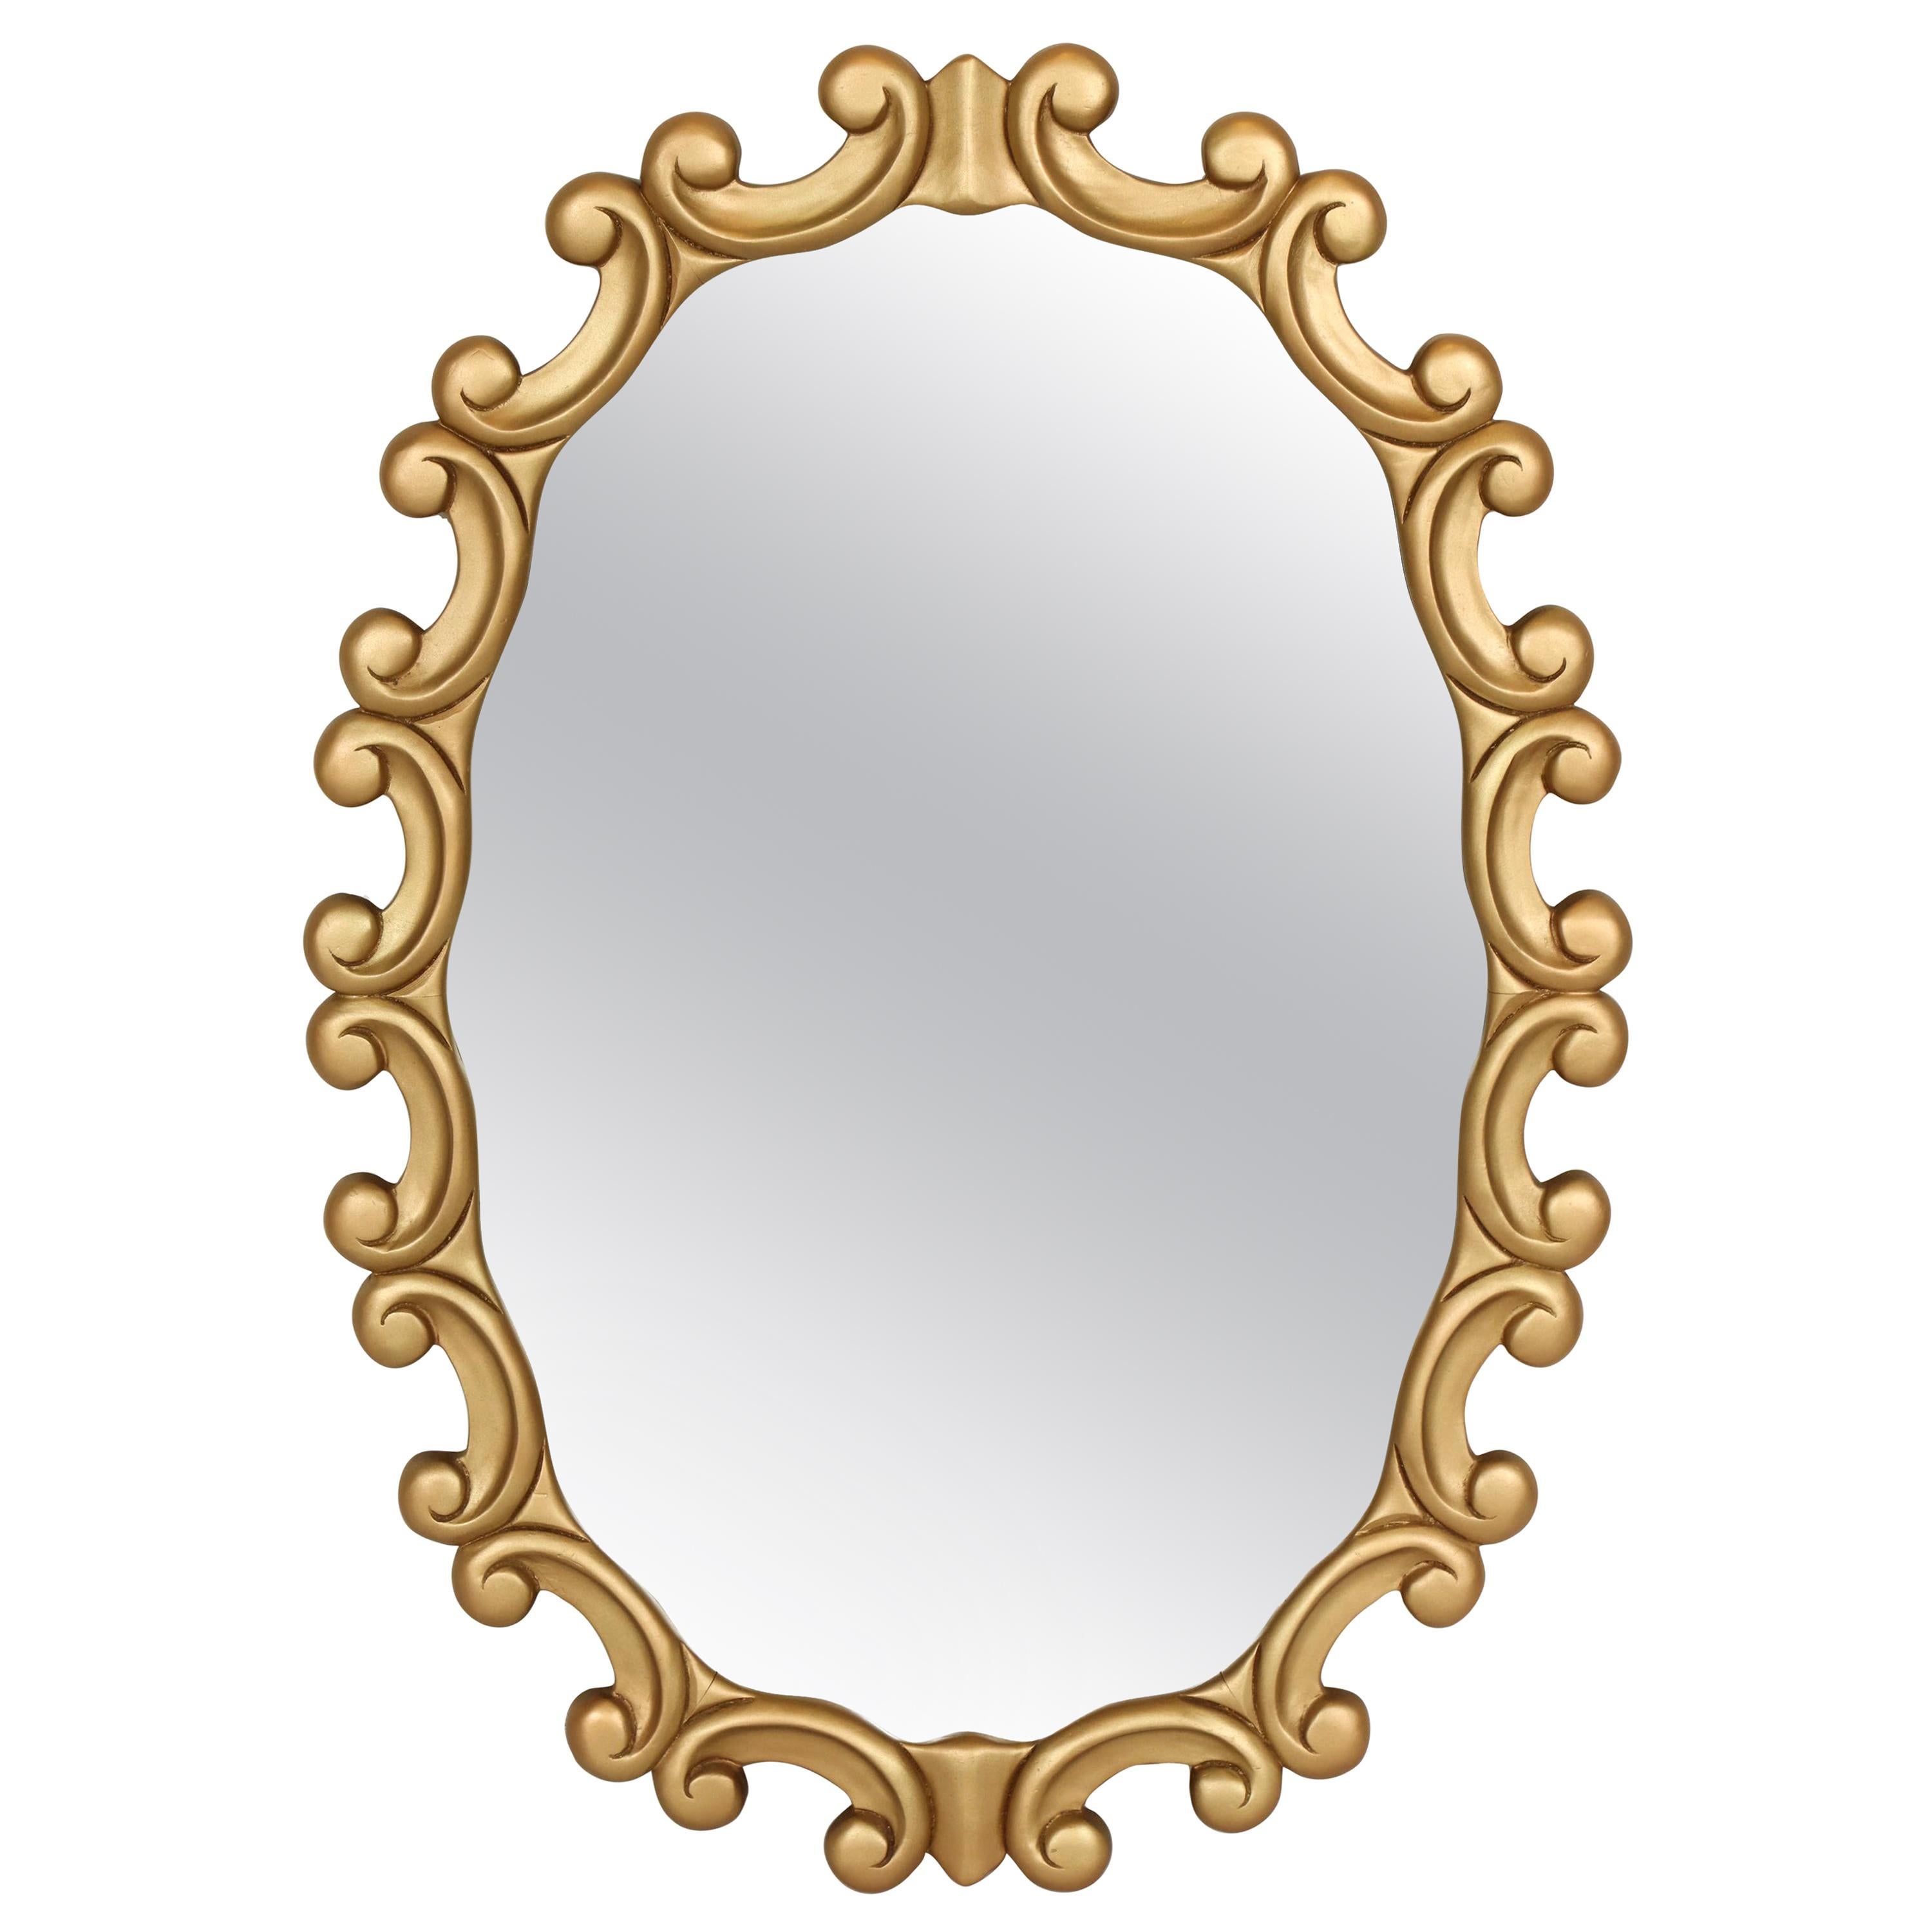 Mirror, Mid-Century, Painted Gold, Antique Mirror, circa 1950, Oval, Large Size